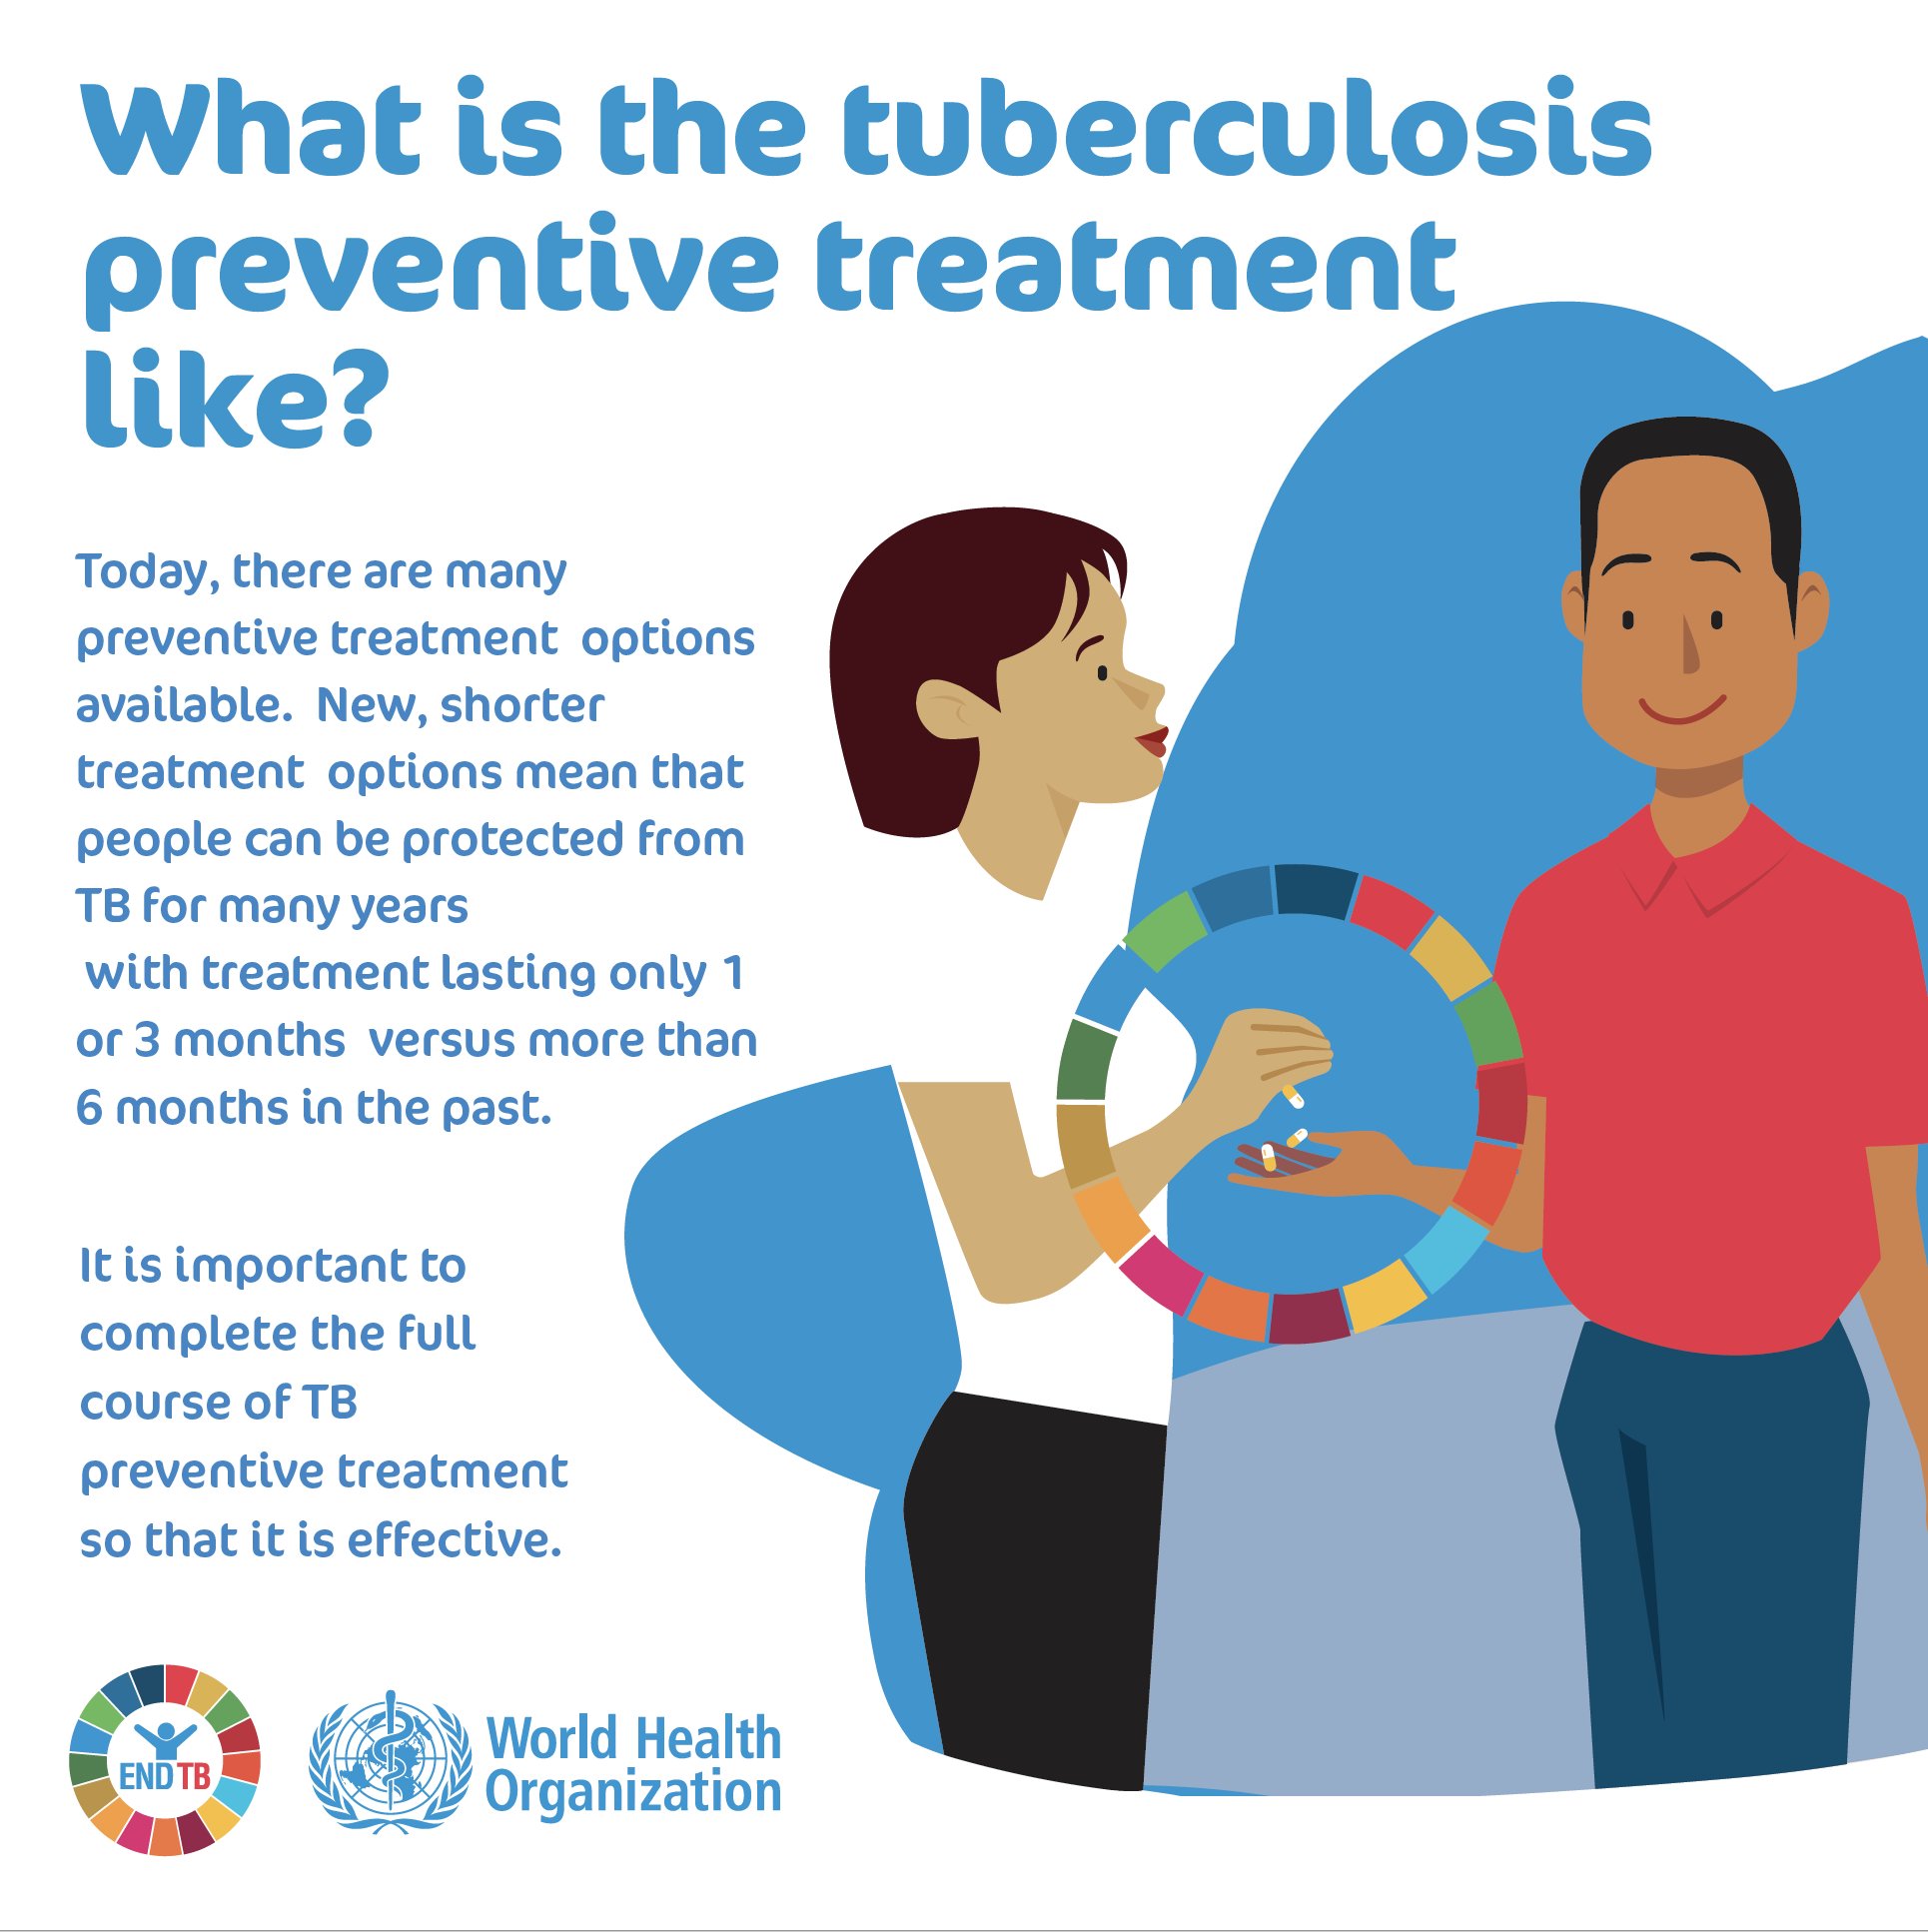 World Health Organization (WHO) on X: Today, there are many preventive  treatment options available. New, shorter treatment options mean that  people can be protected from TB for many years: new treatment lasts